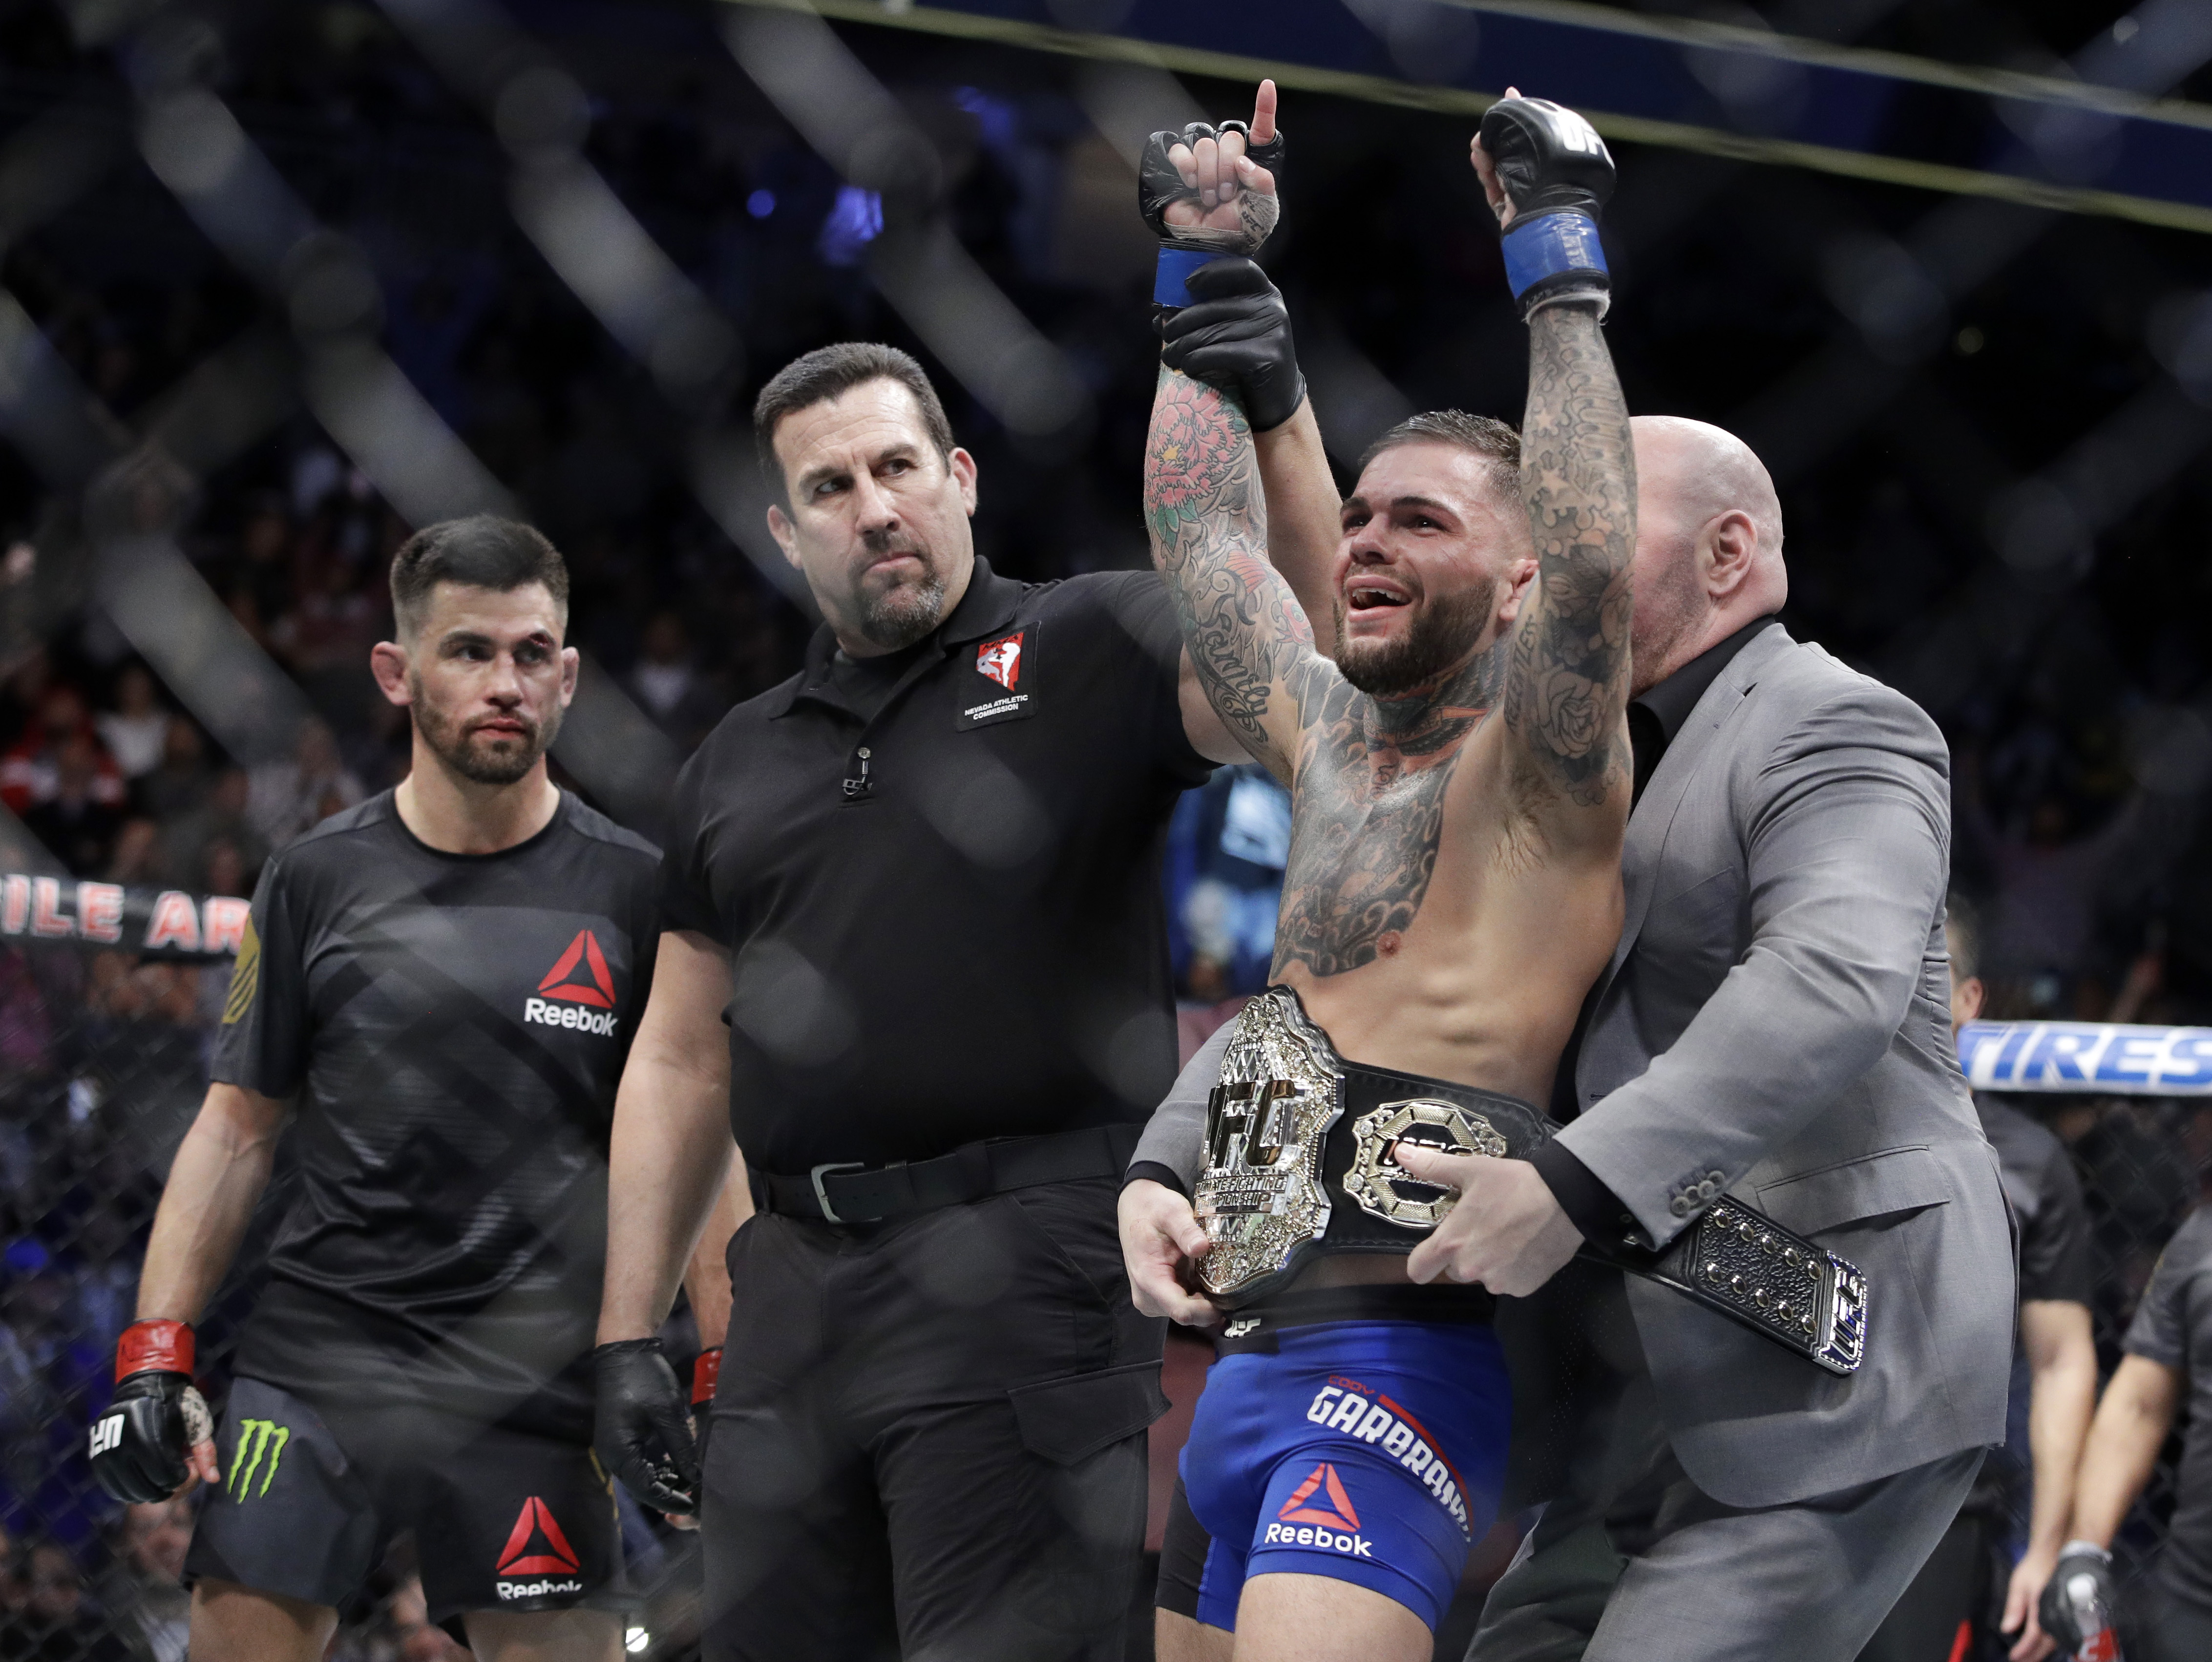 Cody Garbrandt, right, celebrates as he receives his belt after defeating Dominick Cruz, left, in a bantamweight championship mixed martial arts bout at UFC 207, Friday, Dec. 30, 2016, in Las Vegas. AP